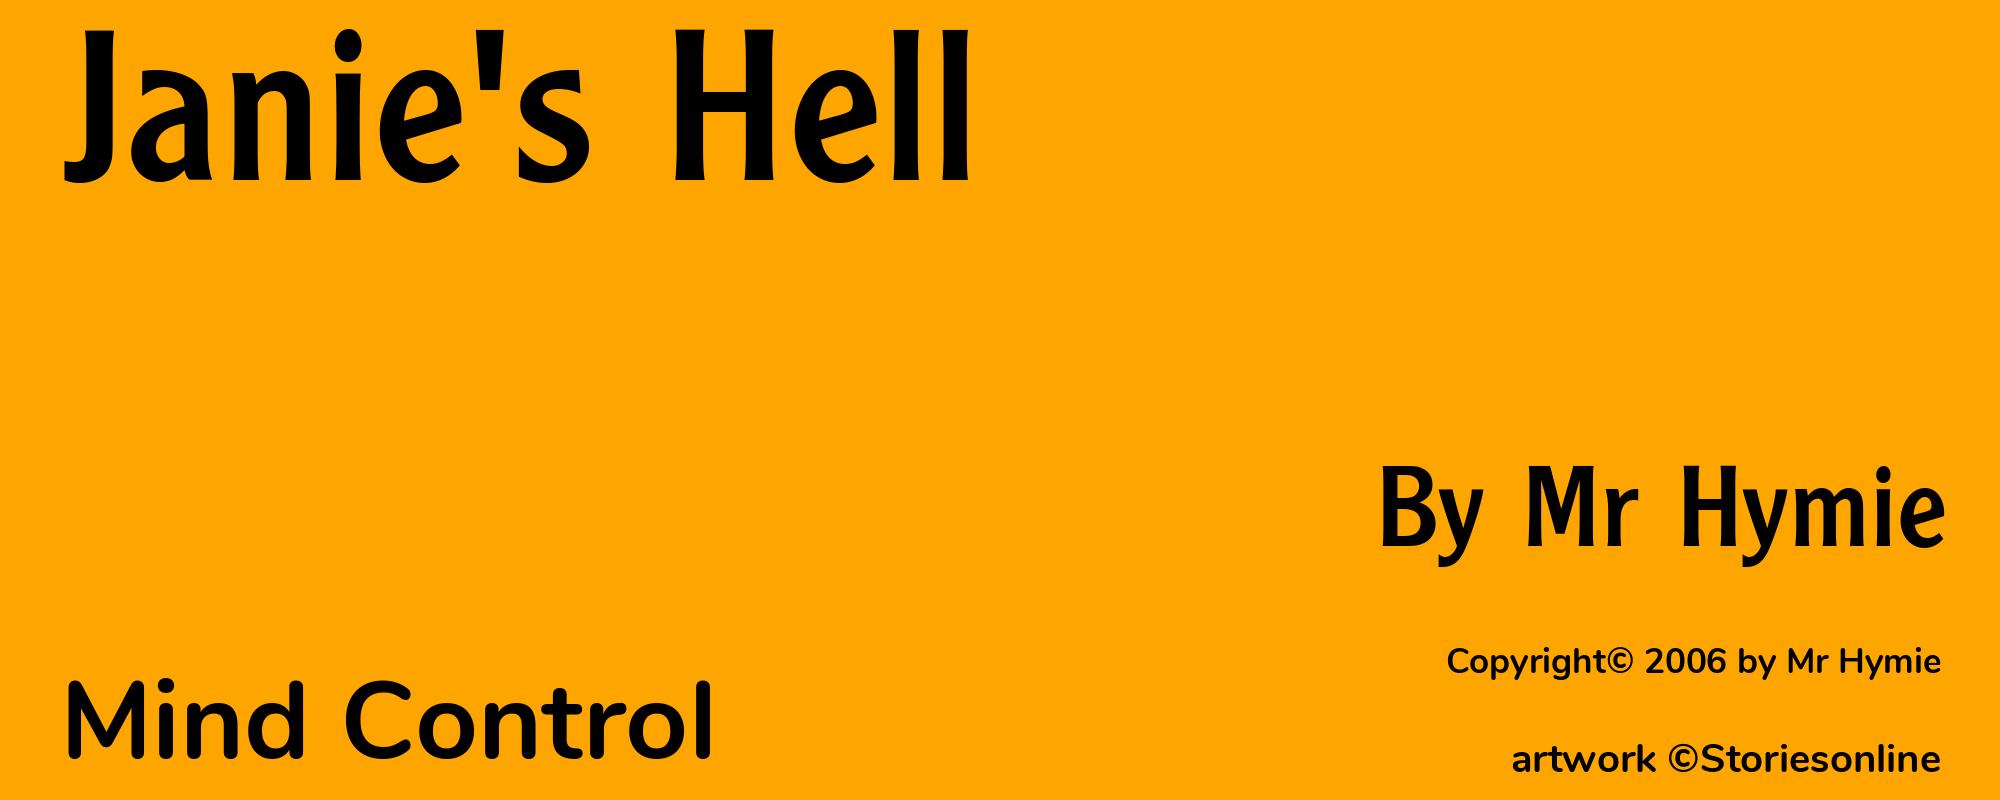 Janie's Hell - Cover